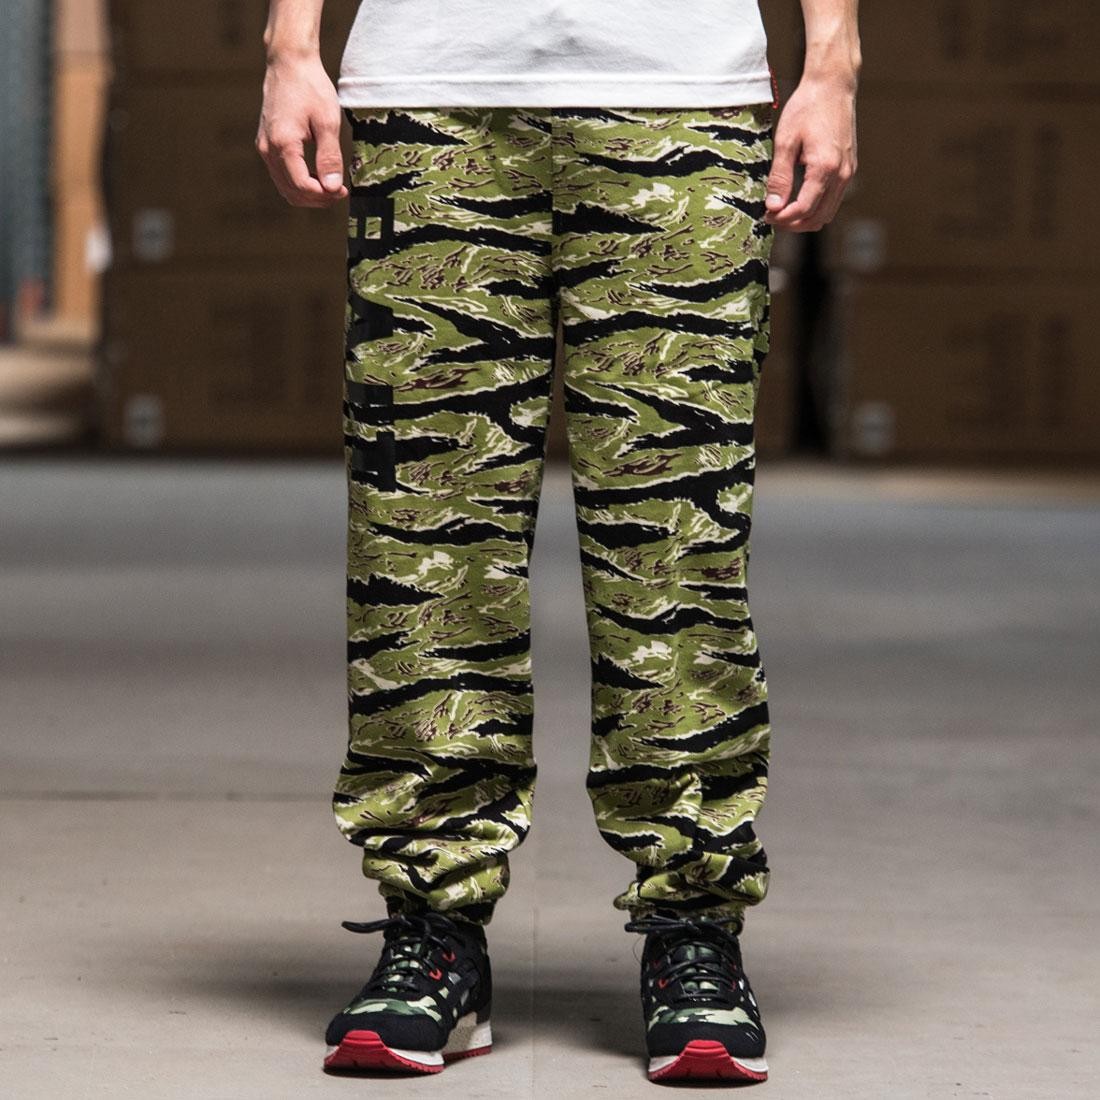 Women's Premium Blue Camo Joggers pants for sale - Exclusive Design Camouflage  Joggers - Sustainable Outdoor Clothing | Camouflage Gear | Stitch & Simon |  British Brand